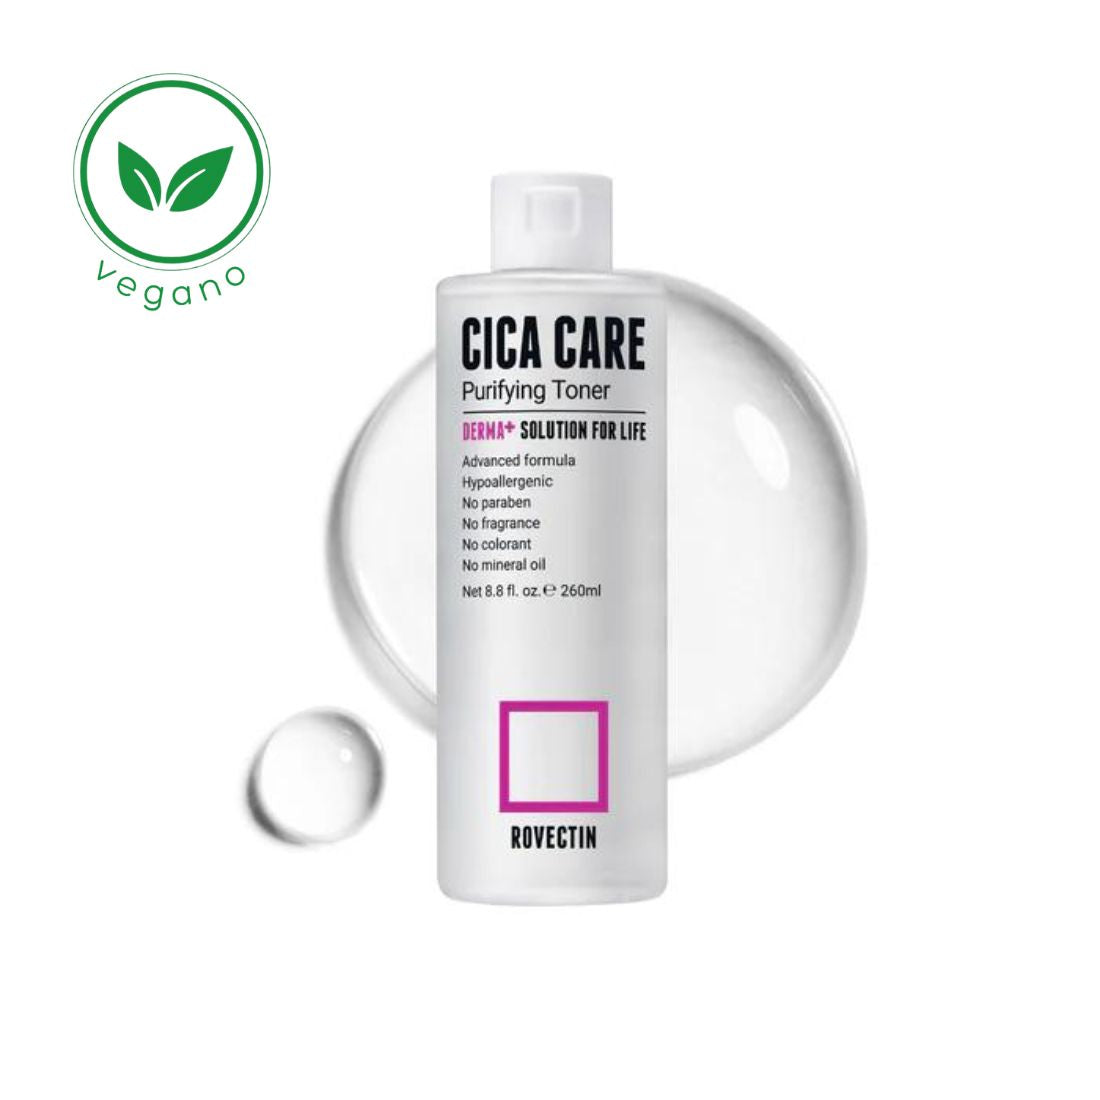 Rovectin - Cica Care Purifying Toner 260ml